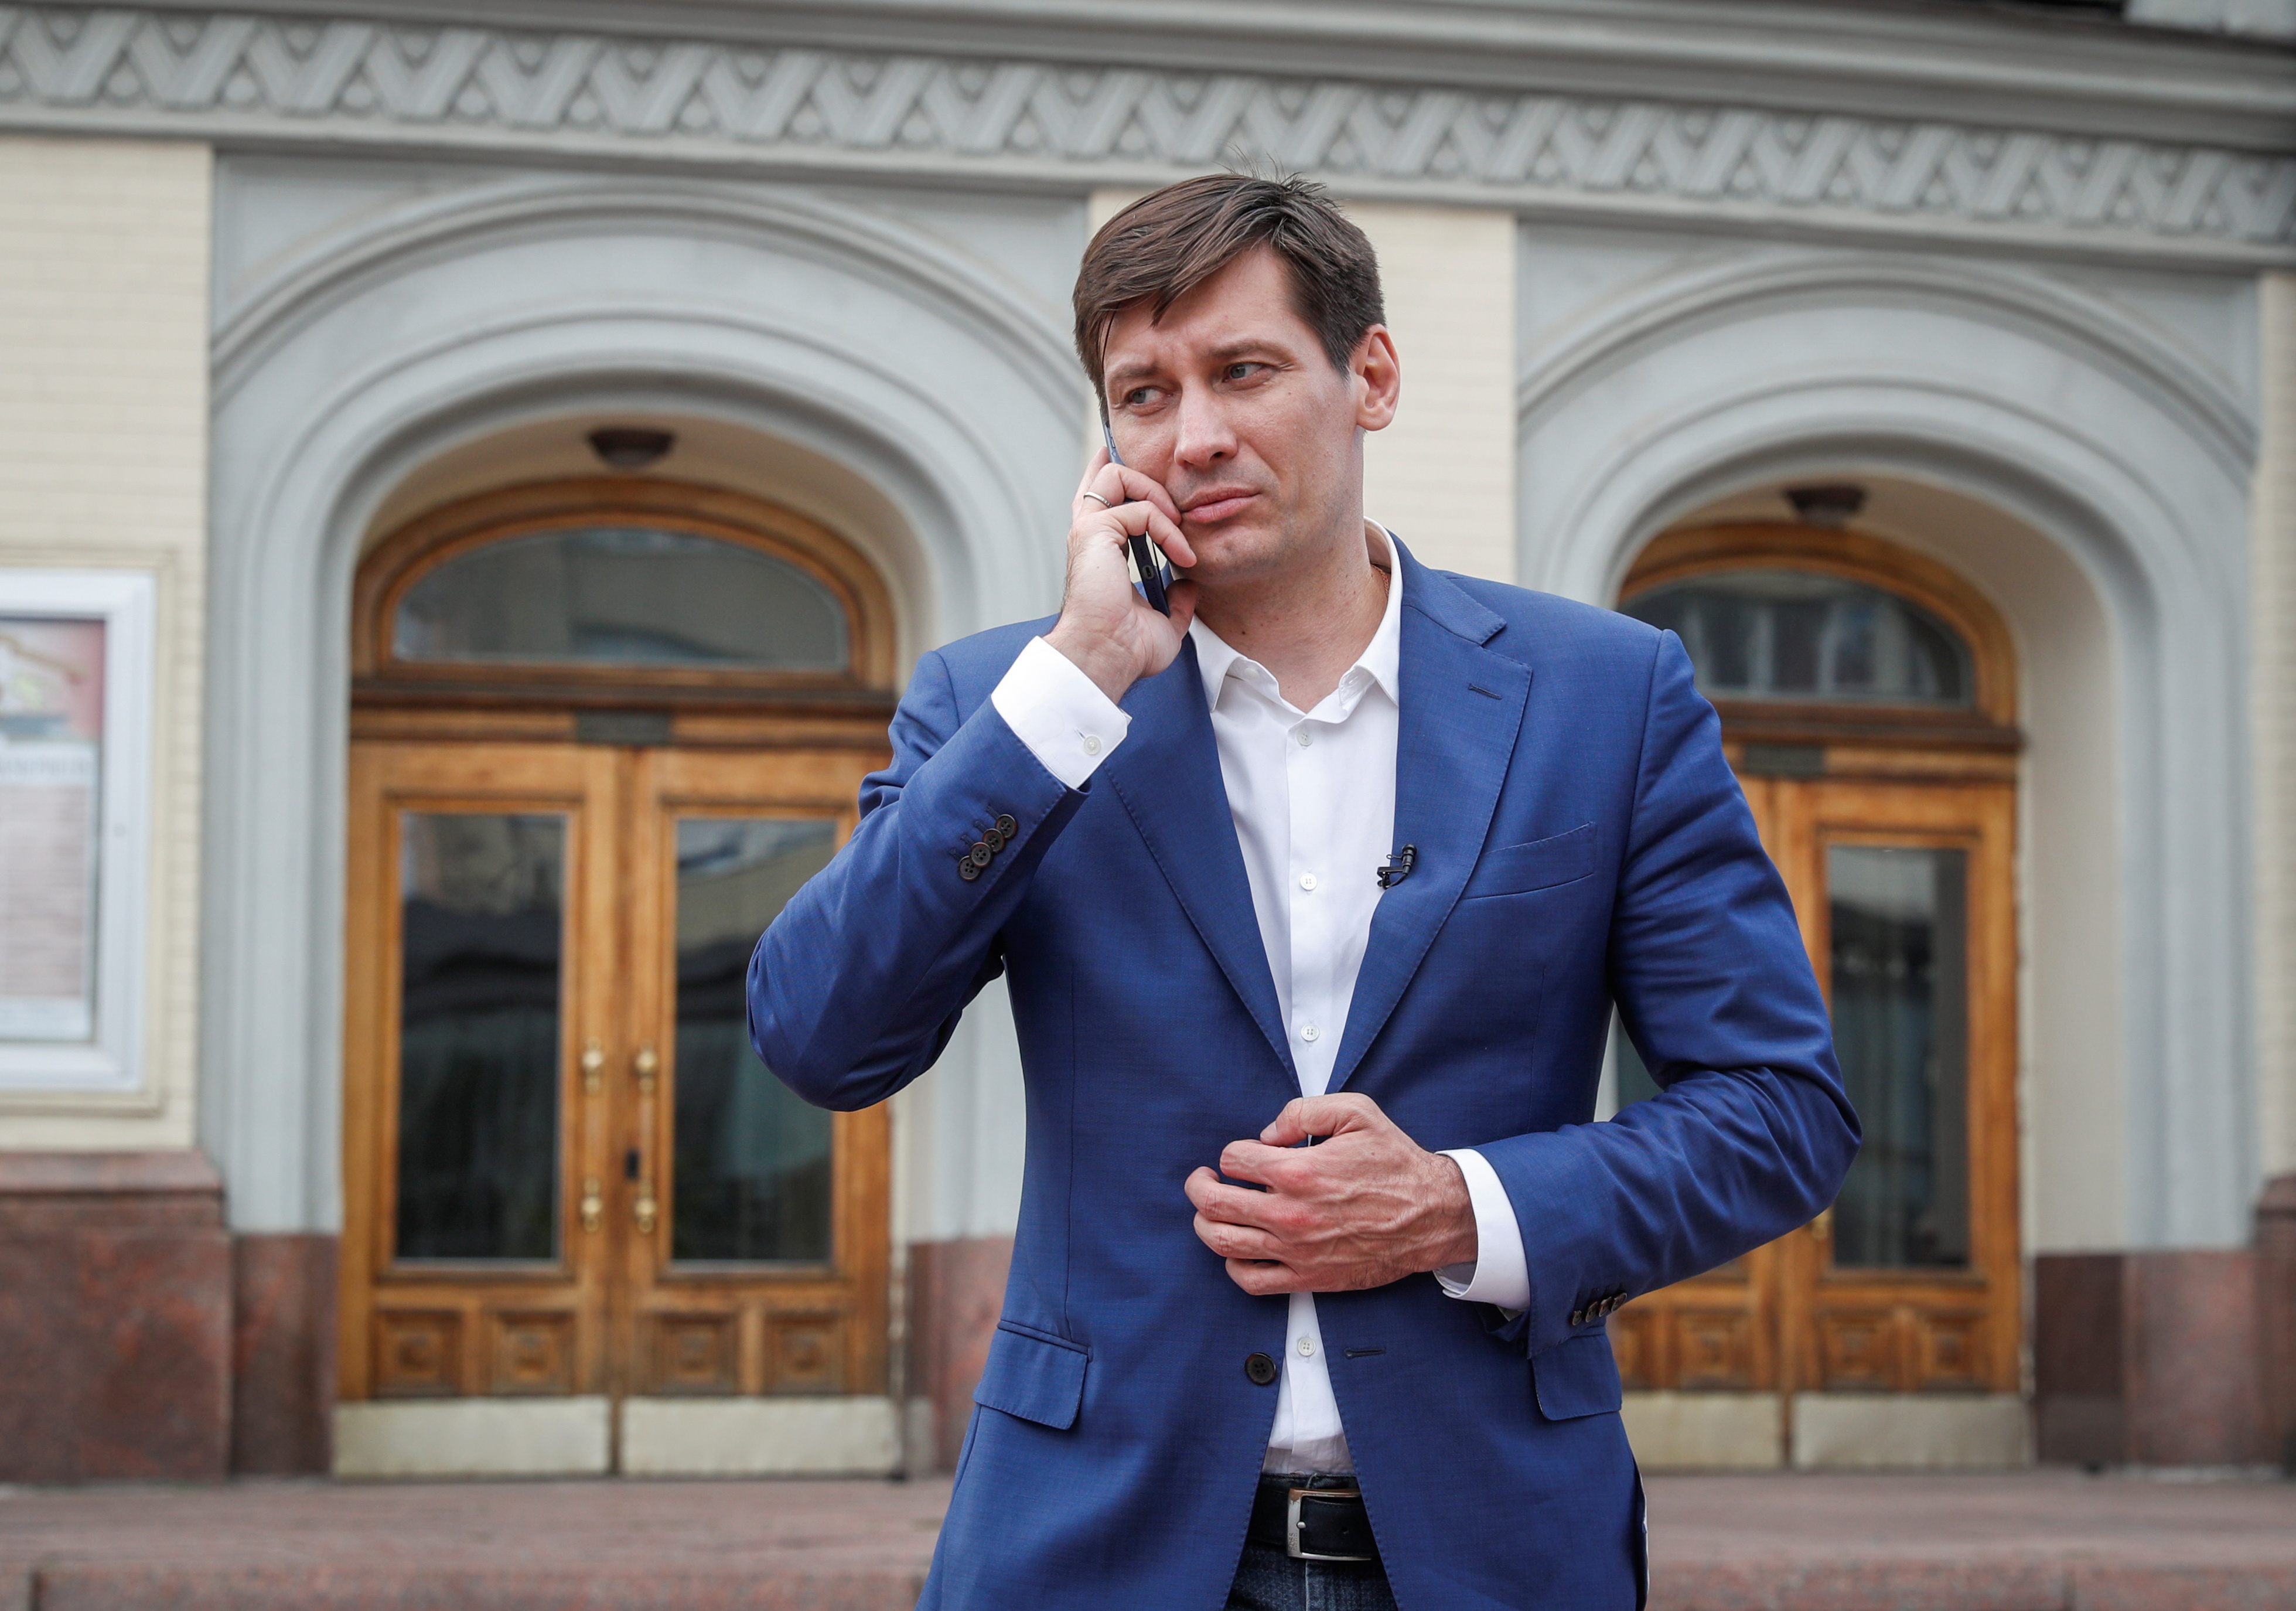 Russian opposition politician Dmitry Gudkov gives an interview in Kyiv